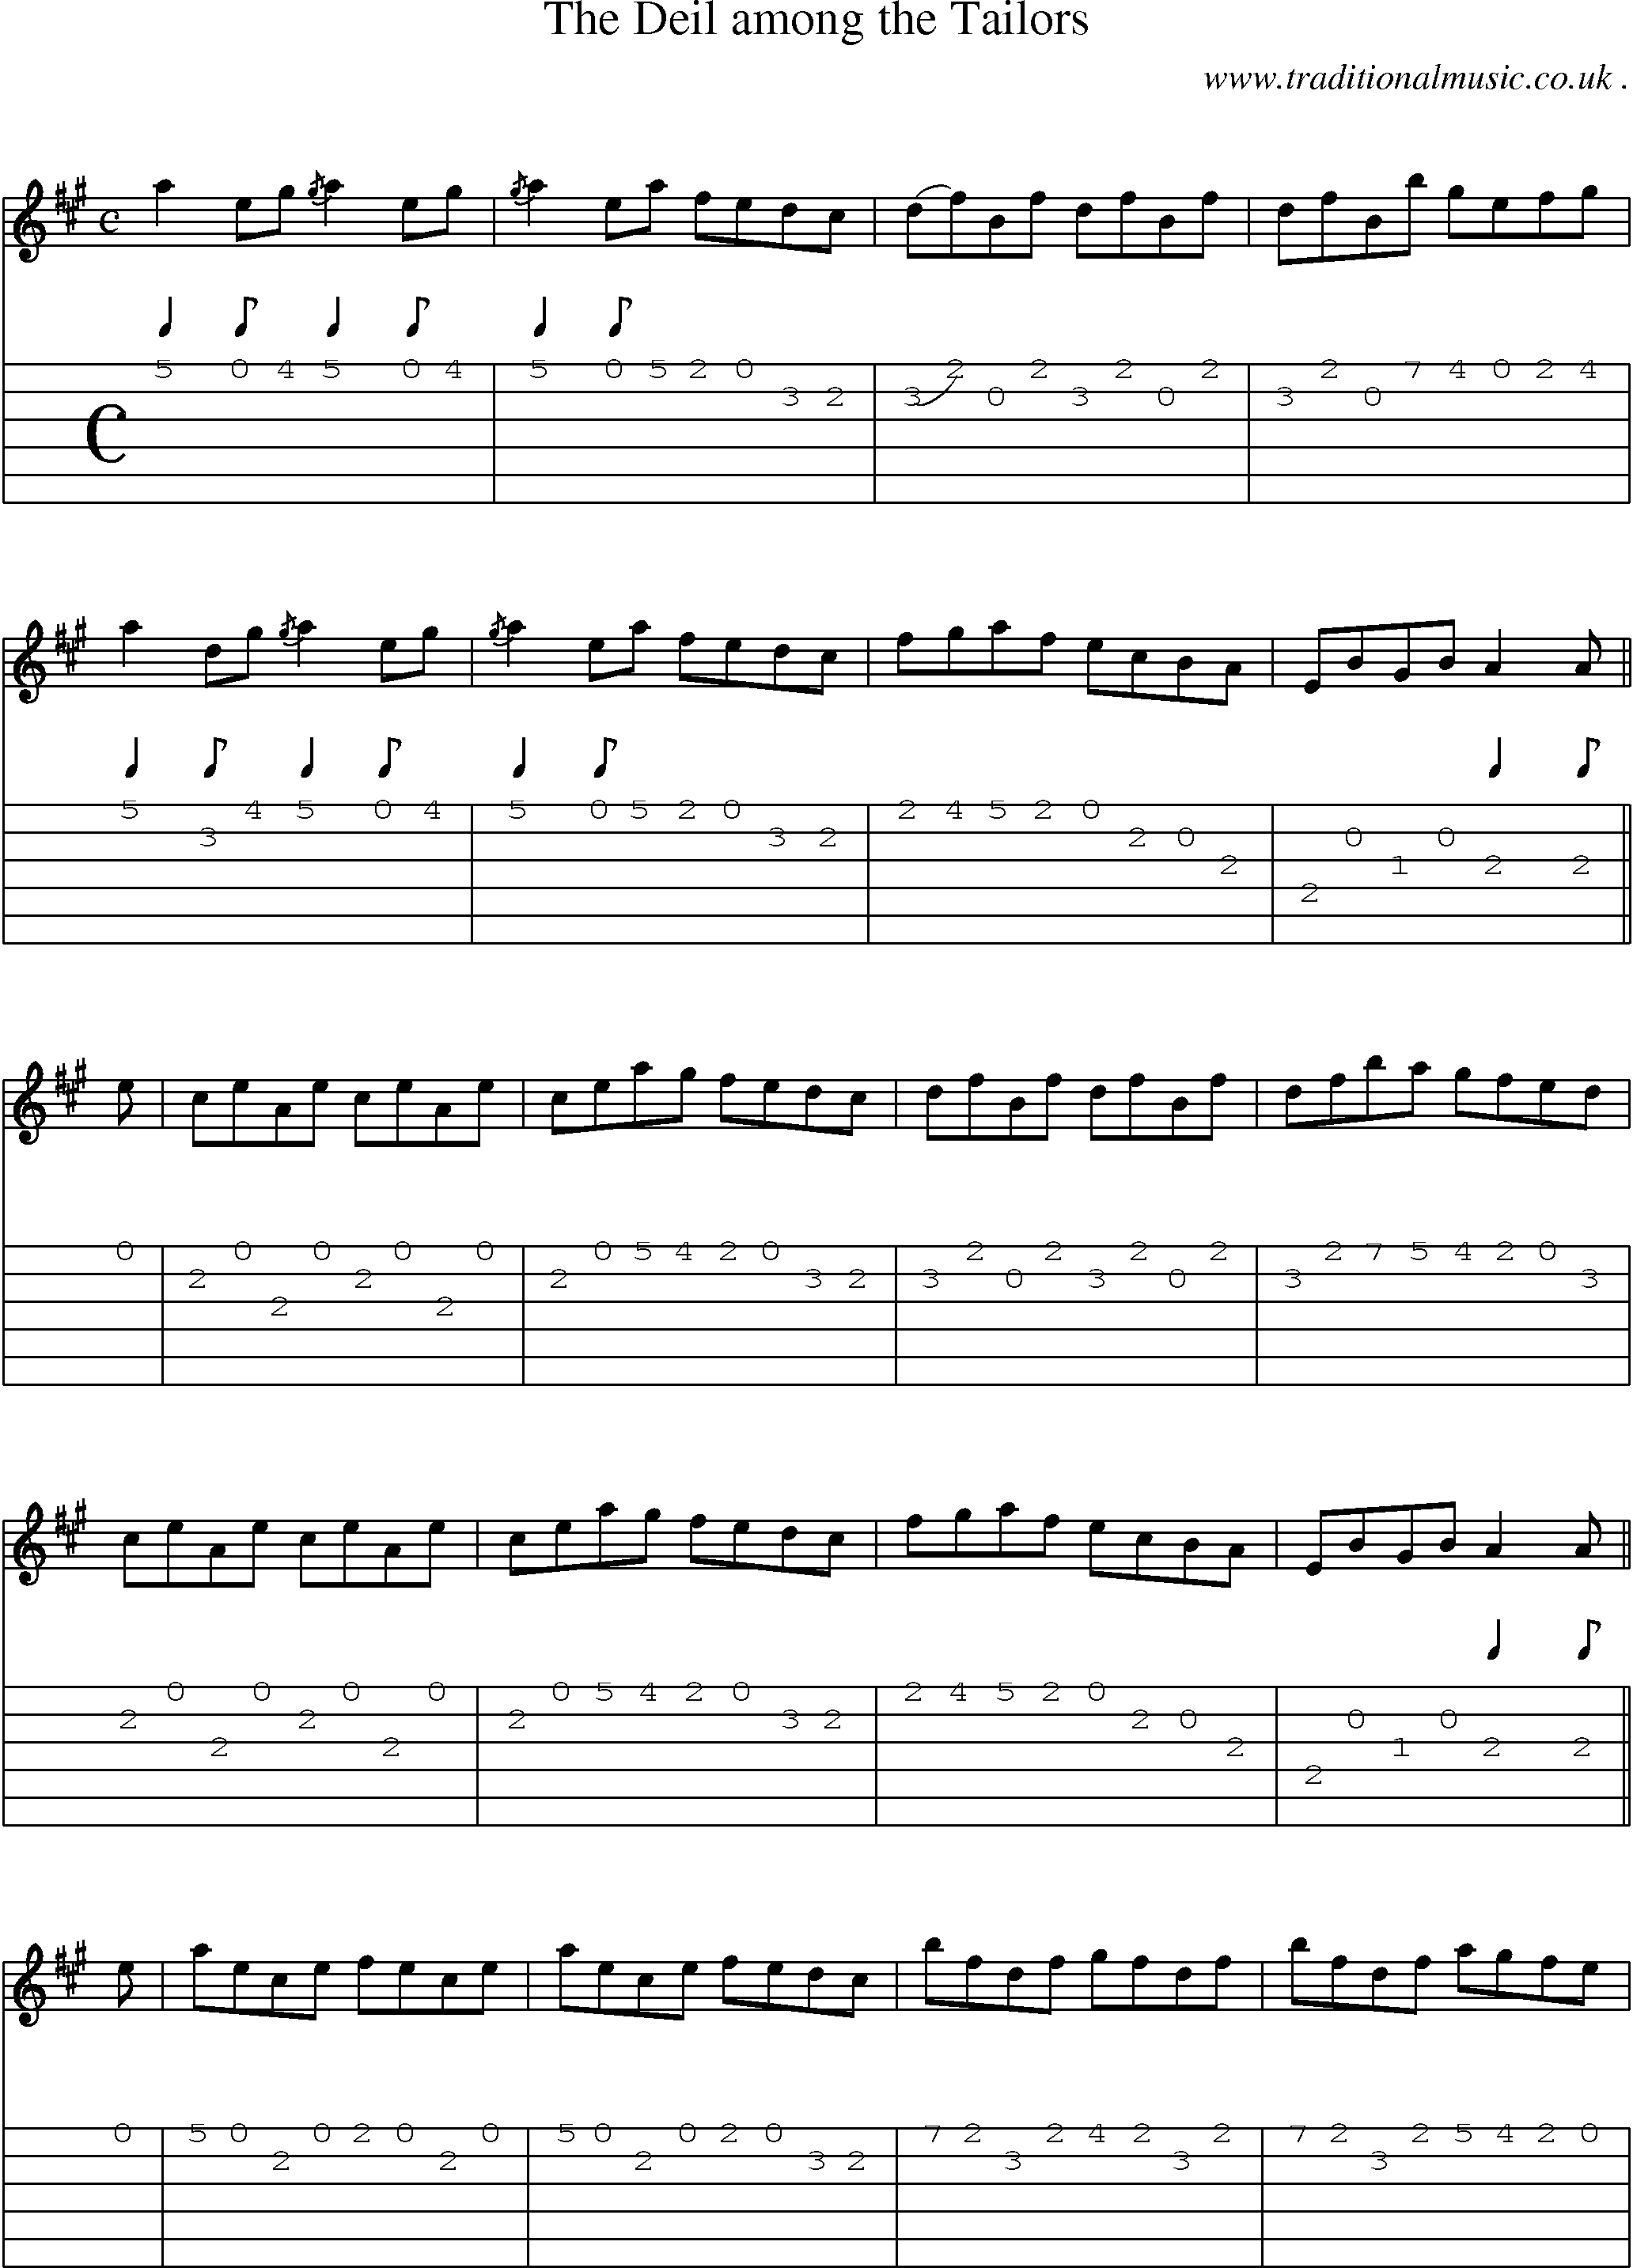 Sheet-music  score, Chords and Guitar Tabs for The Deil Among The Tailors